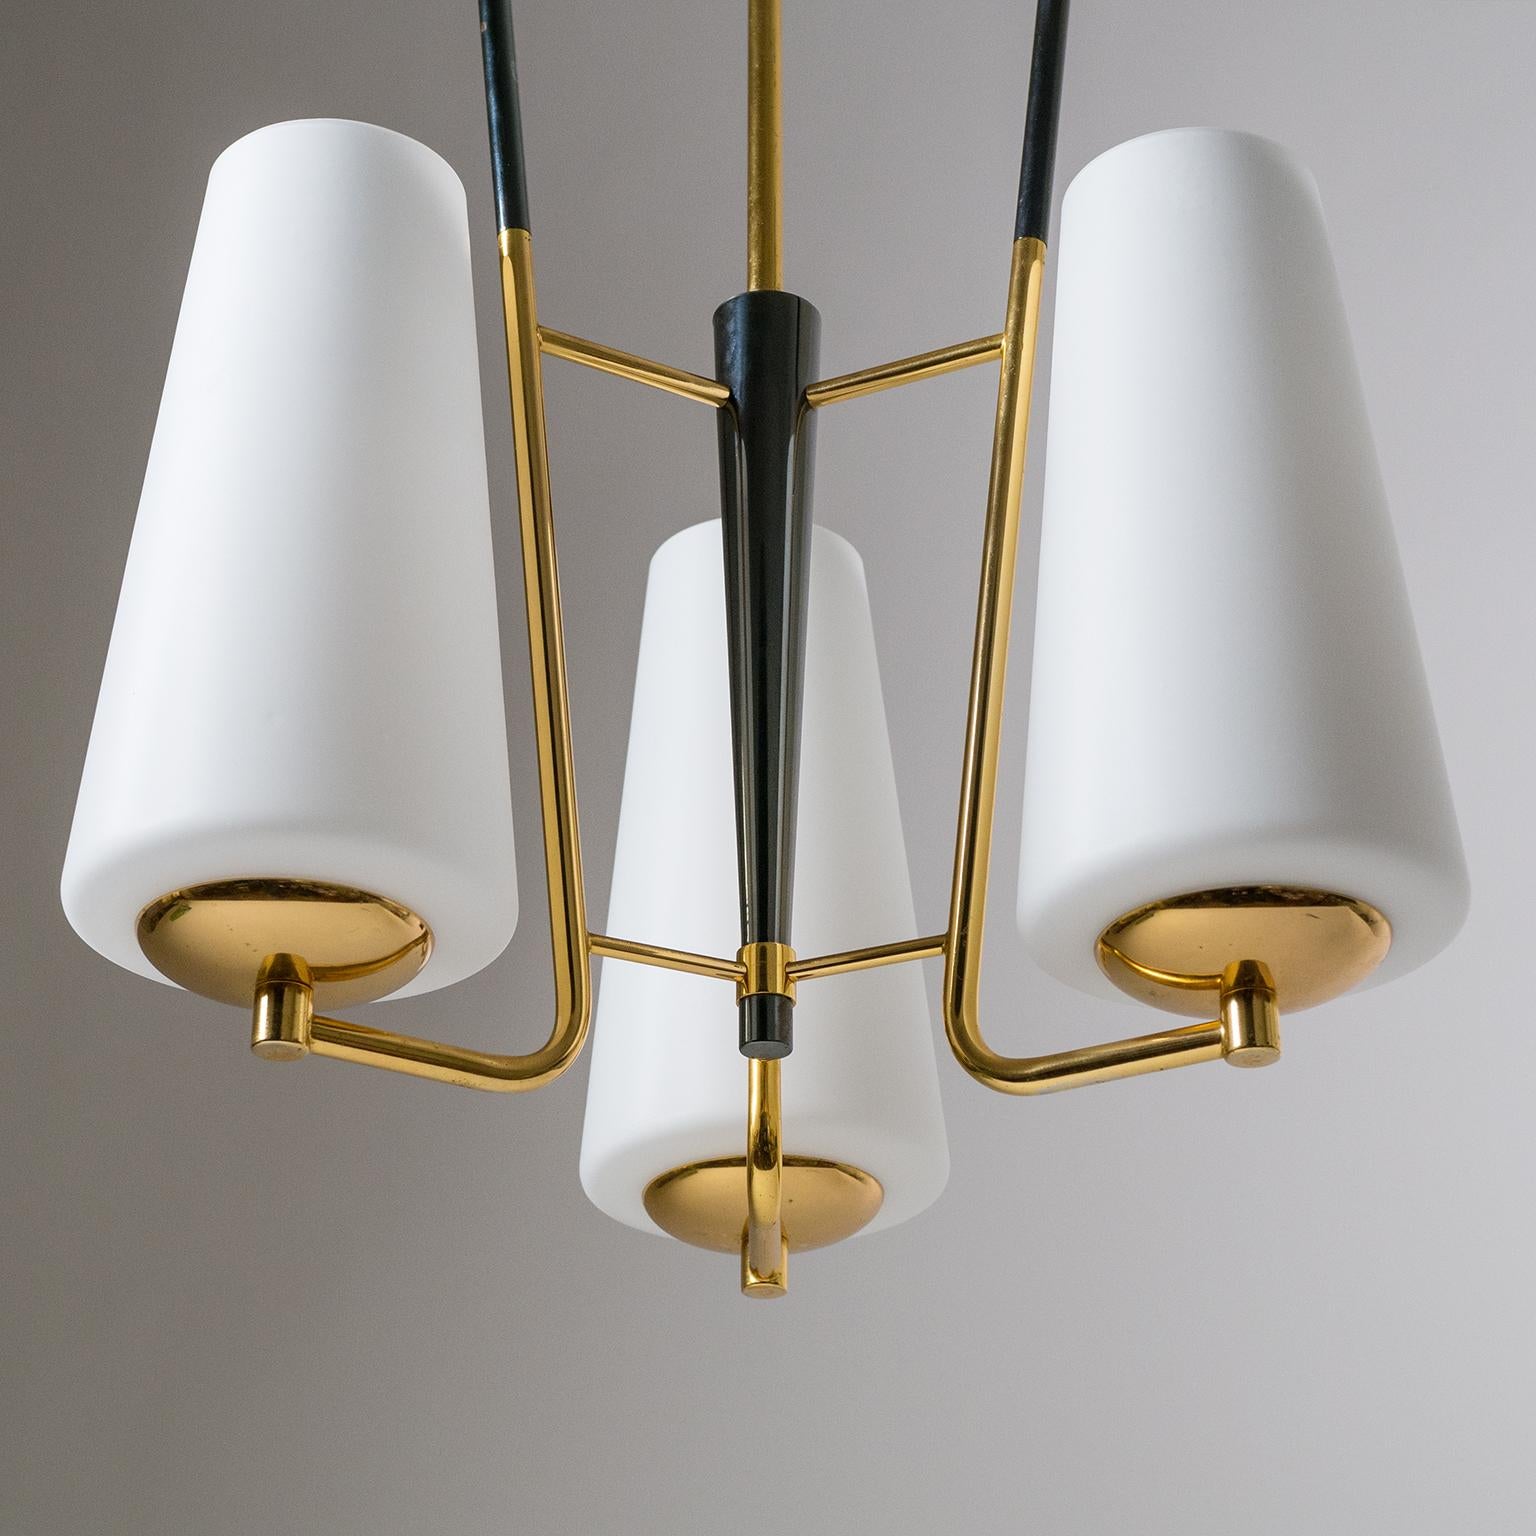 French Modernist Chandelier, 1950s, Satin Glass and Brass 1